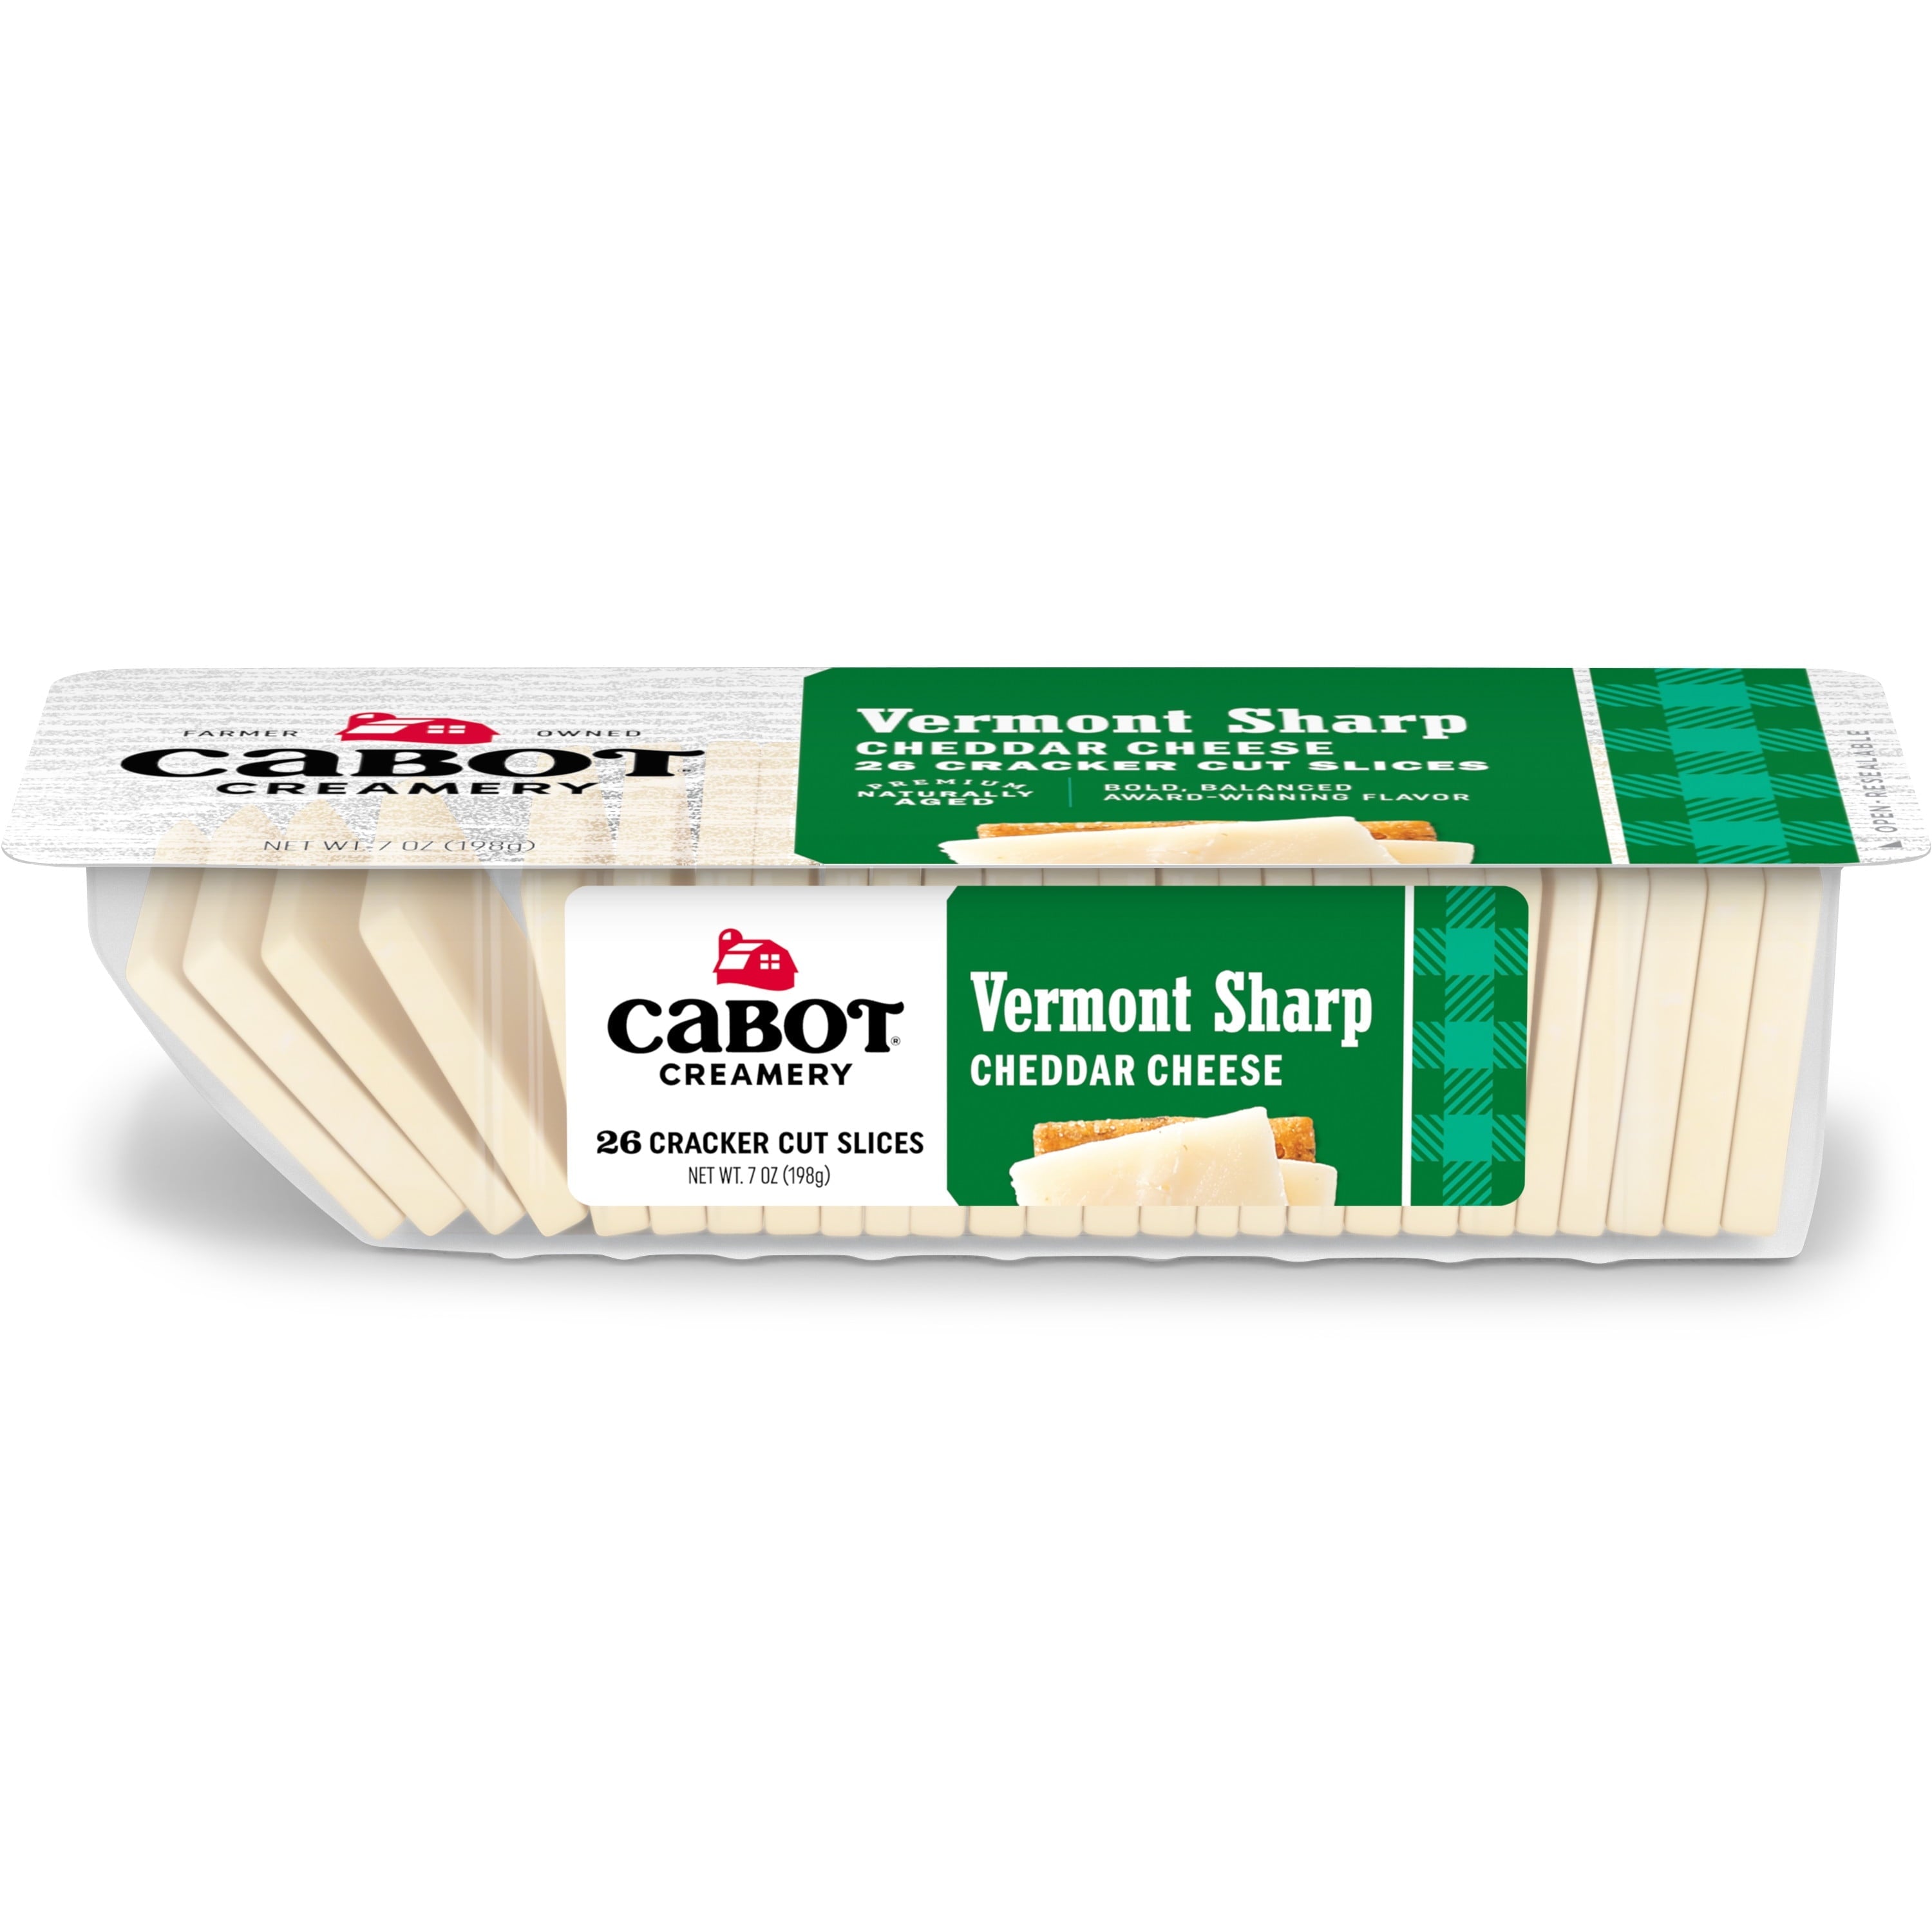 Cabot Cheese Vermont Sharp White Cheddar Cheese Slices 7 oz Pack